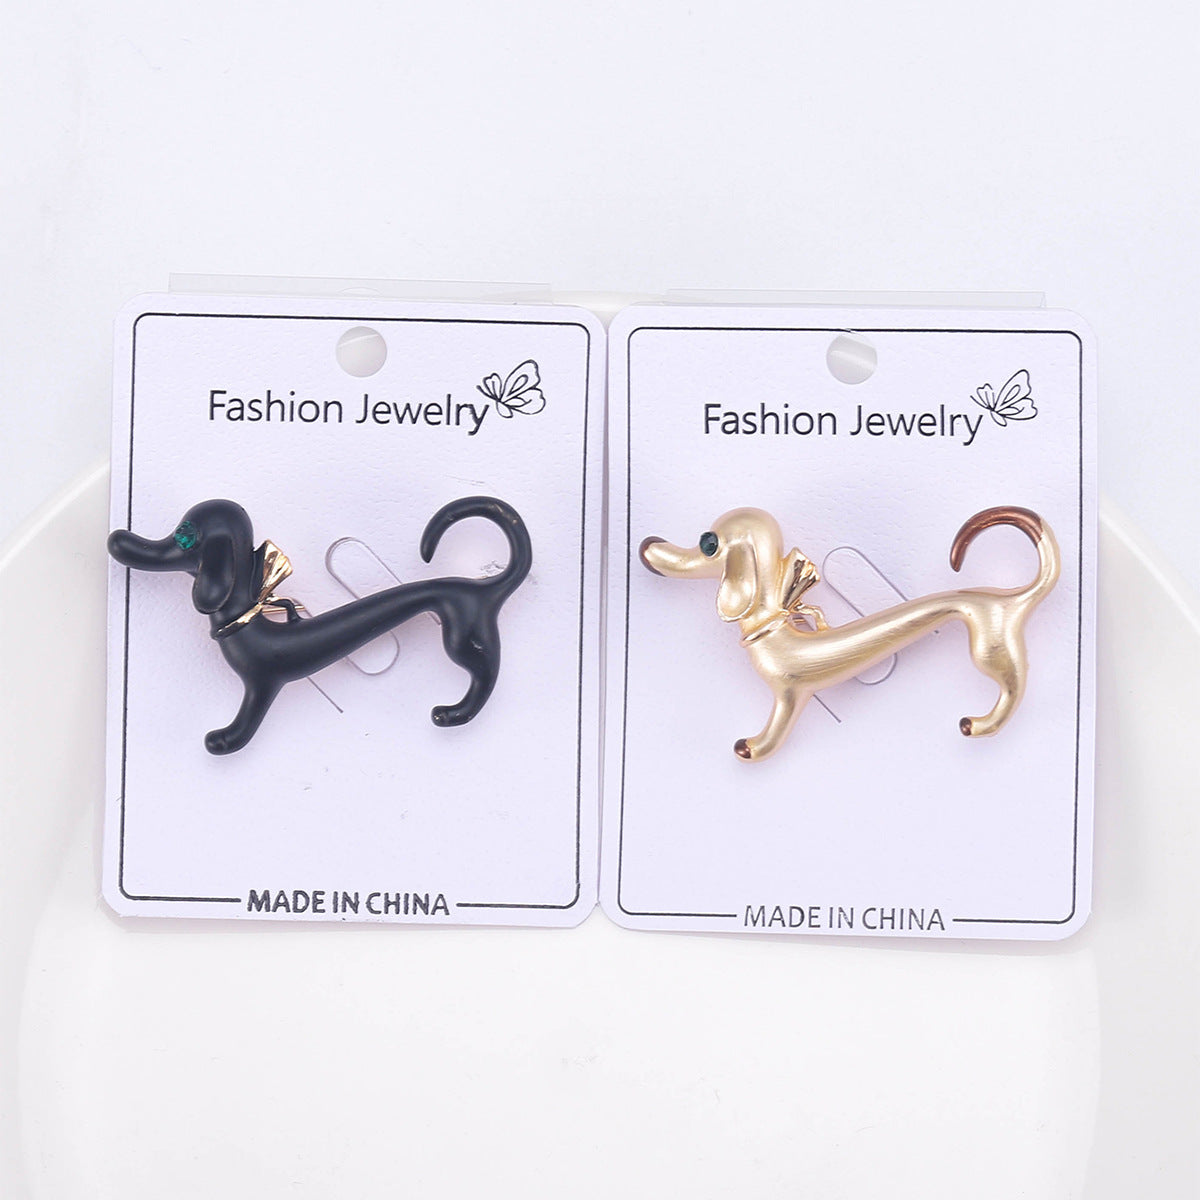 Cute Dripping Oil Sausage Dog Animal Pin Simple Same Style Breastpin Ornament